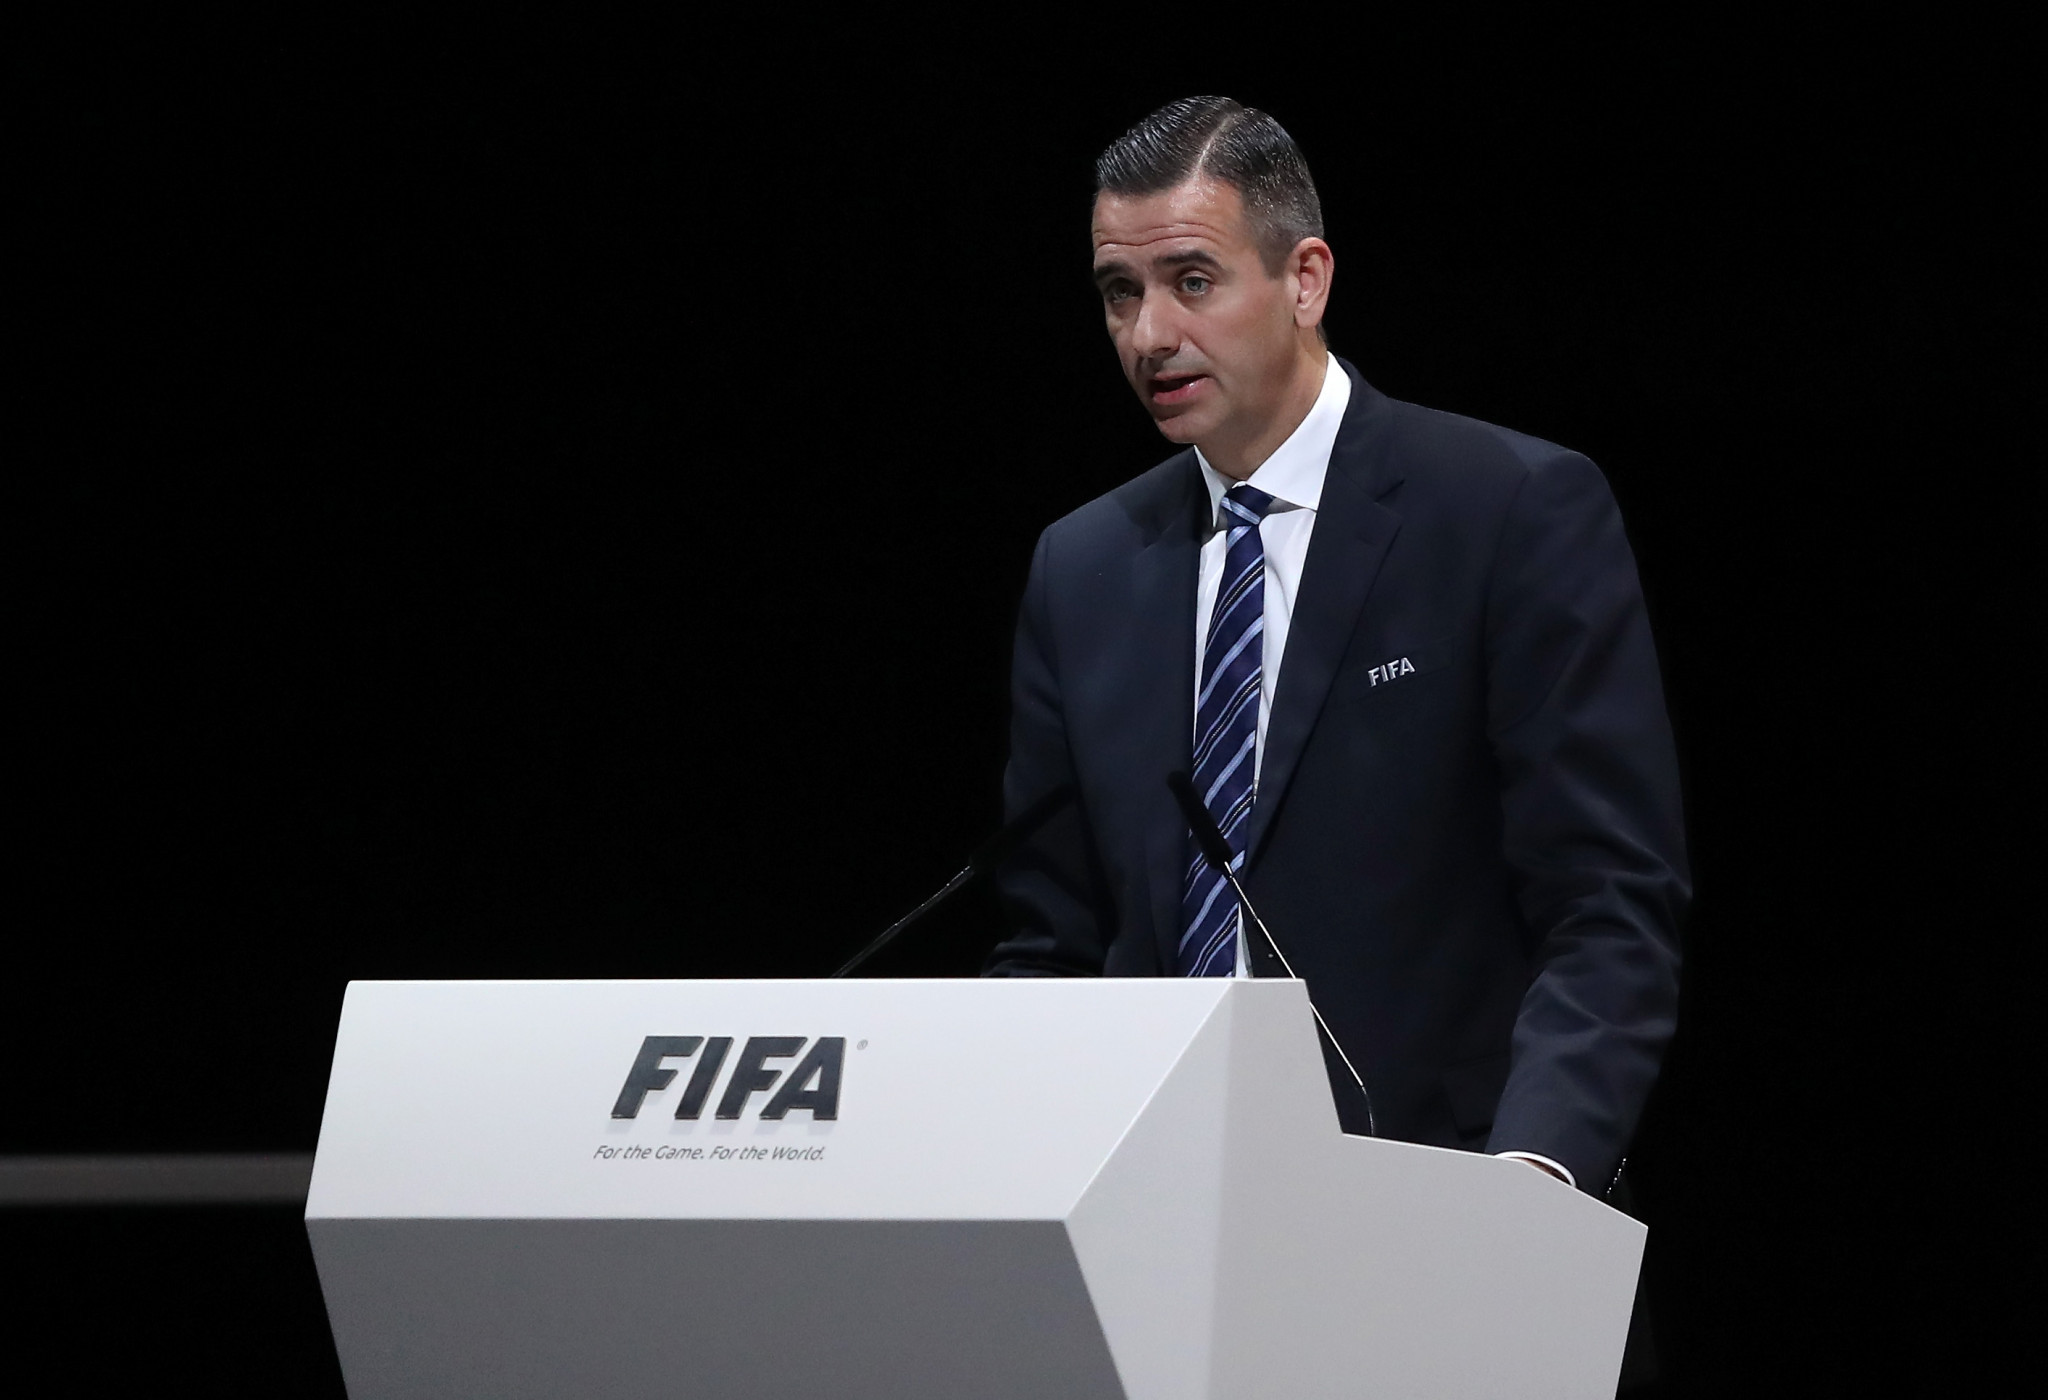 FIFA suspended Markus Kattner for 10 years over conflicts of interest and abusing his position ©Getty Images